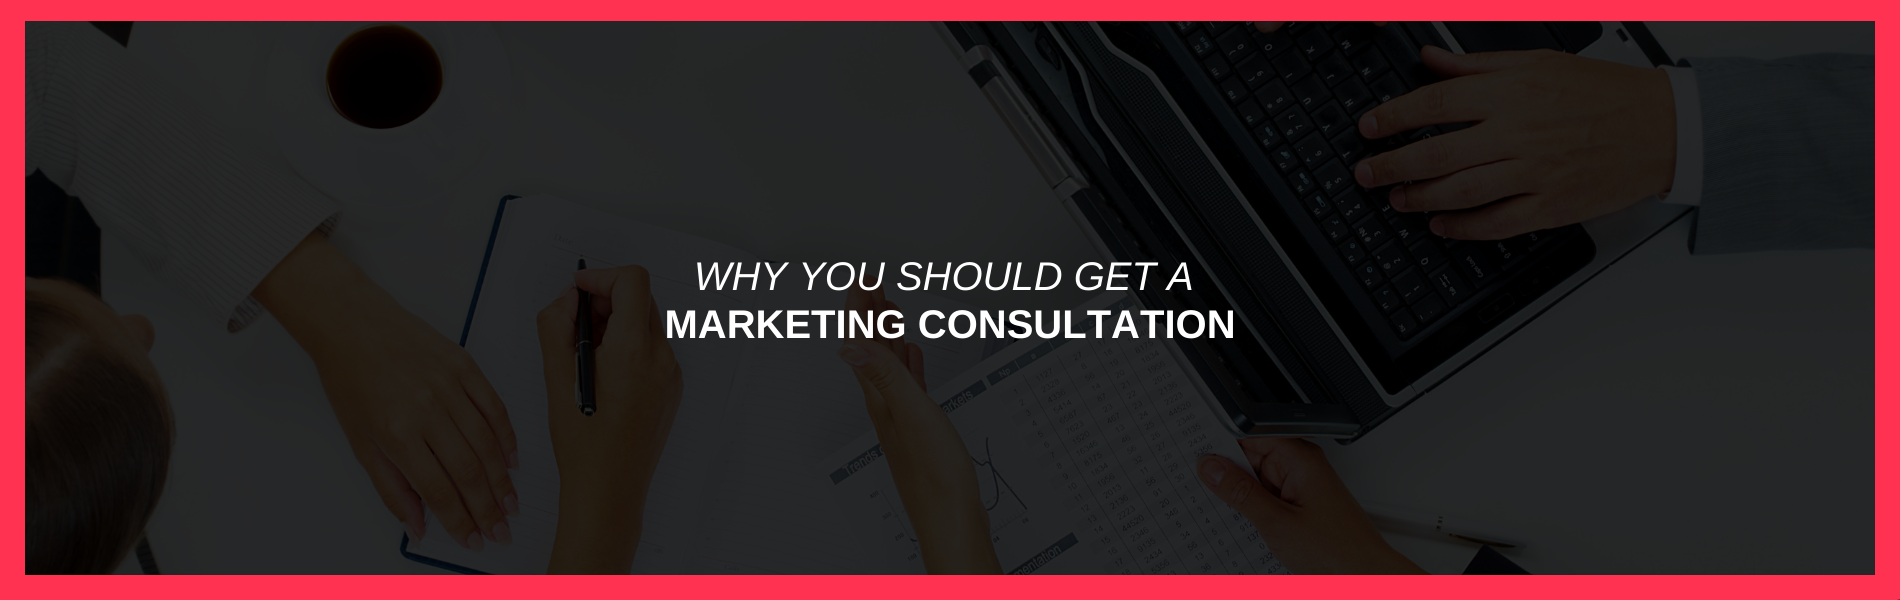 Why You Should Get a Marketing Consultation